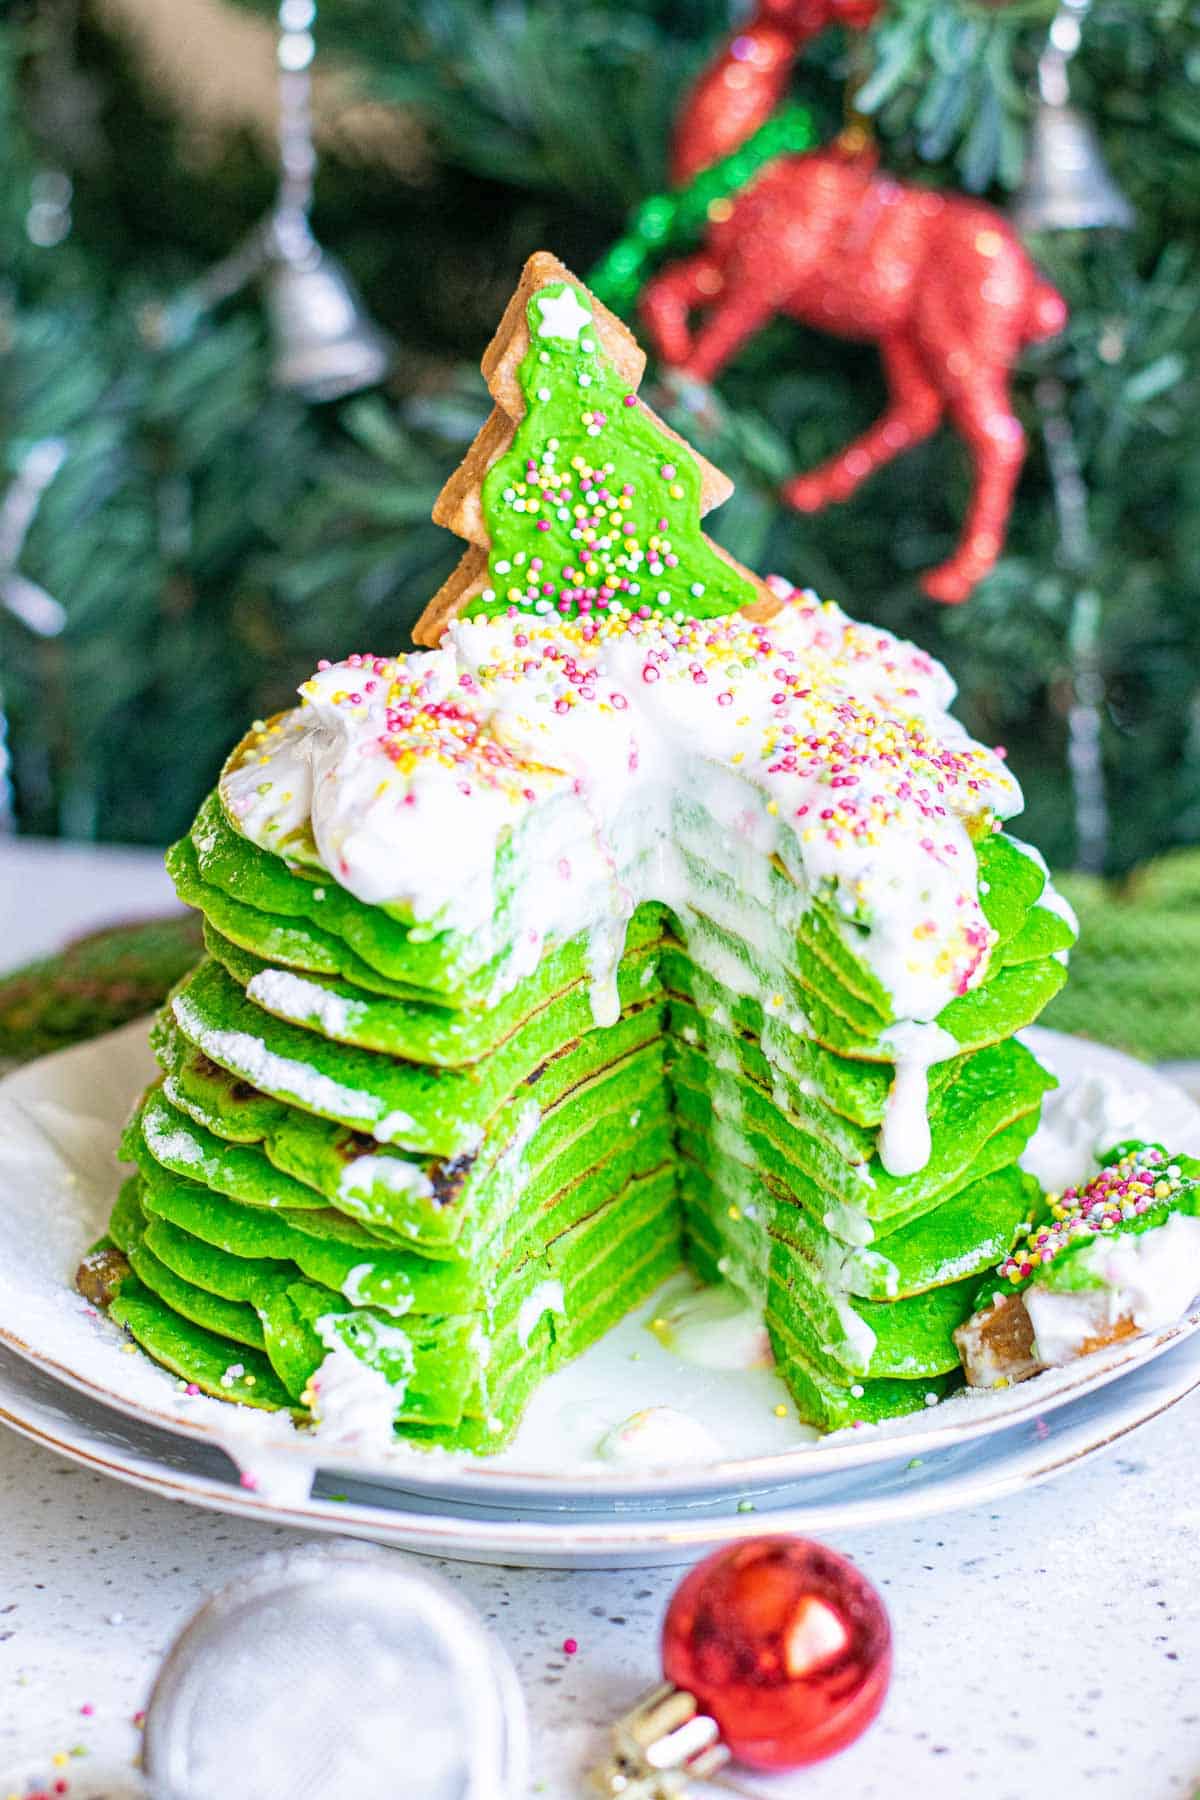 A stack of bright green pancakes with a wedge cut out to show texture. They are topped with whipped cream.